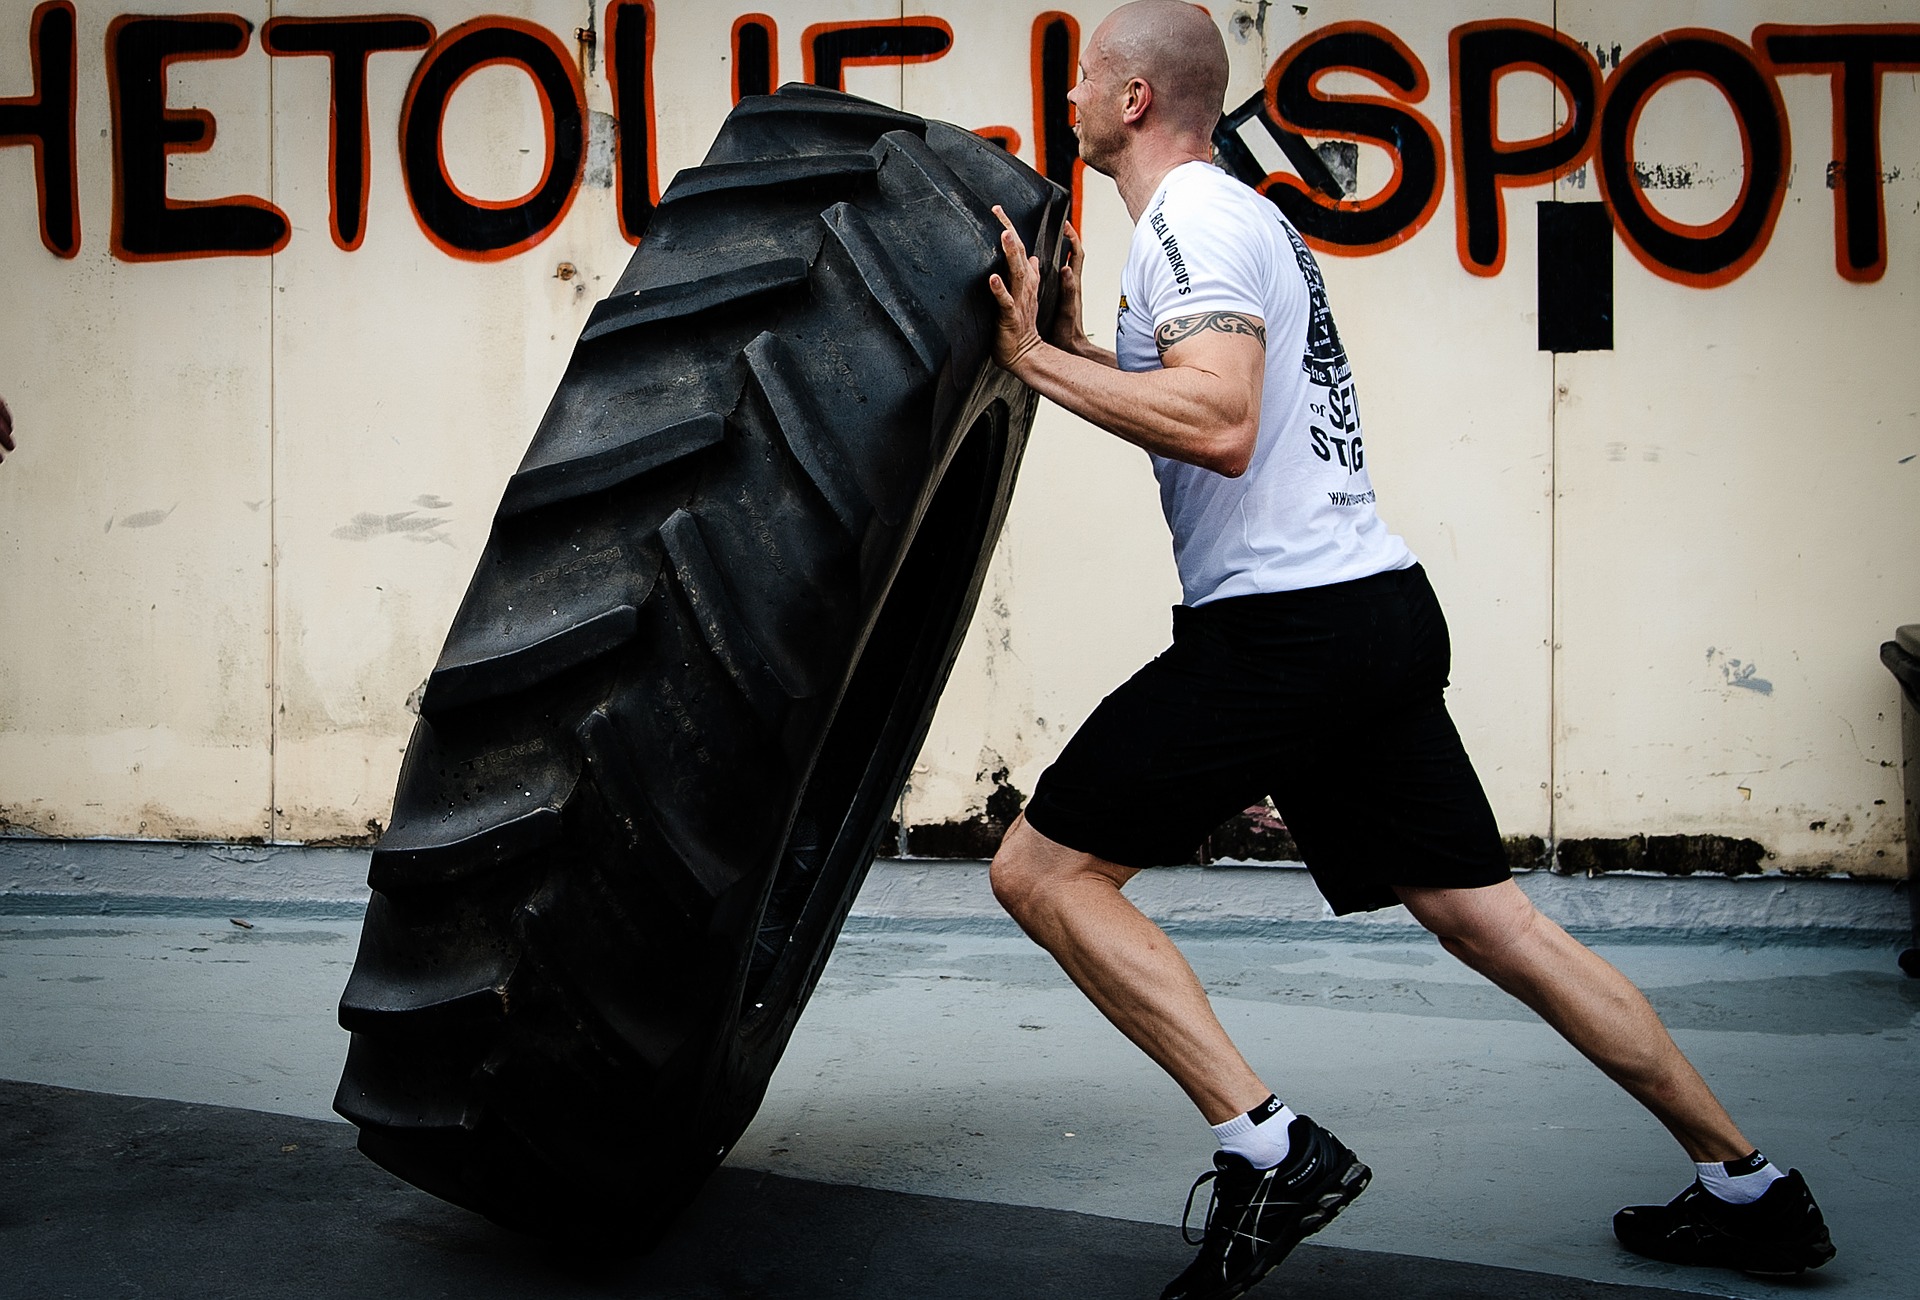 Crossfit, what is it? The innovative physical excercise